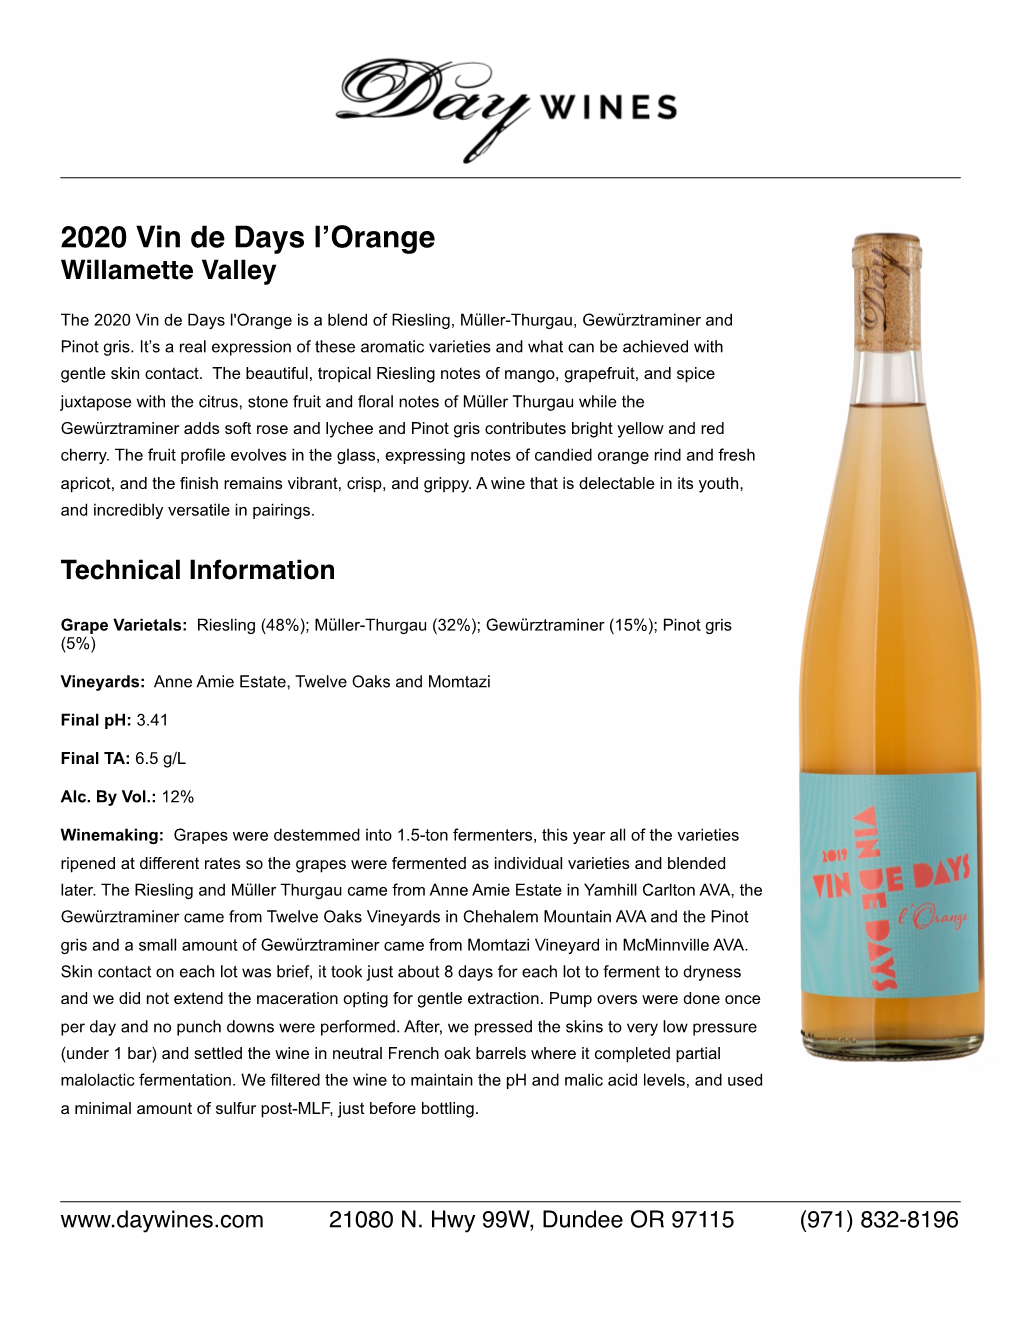 2020 Vin De Days L'orange Is a Blend of Riesling, Müller-Thurgau, Gewürztraminer and Pinot Gris